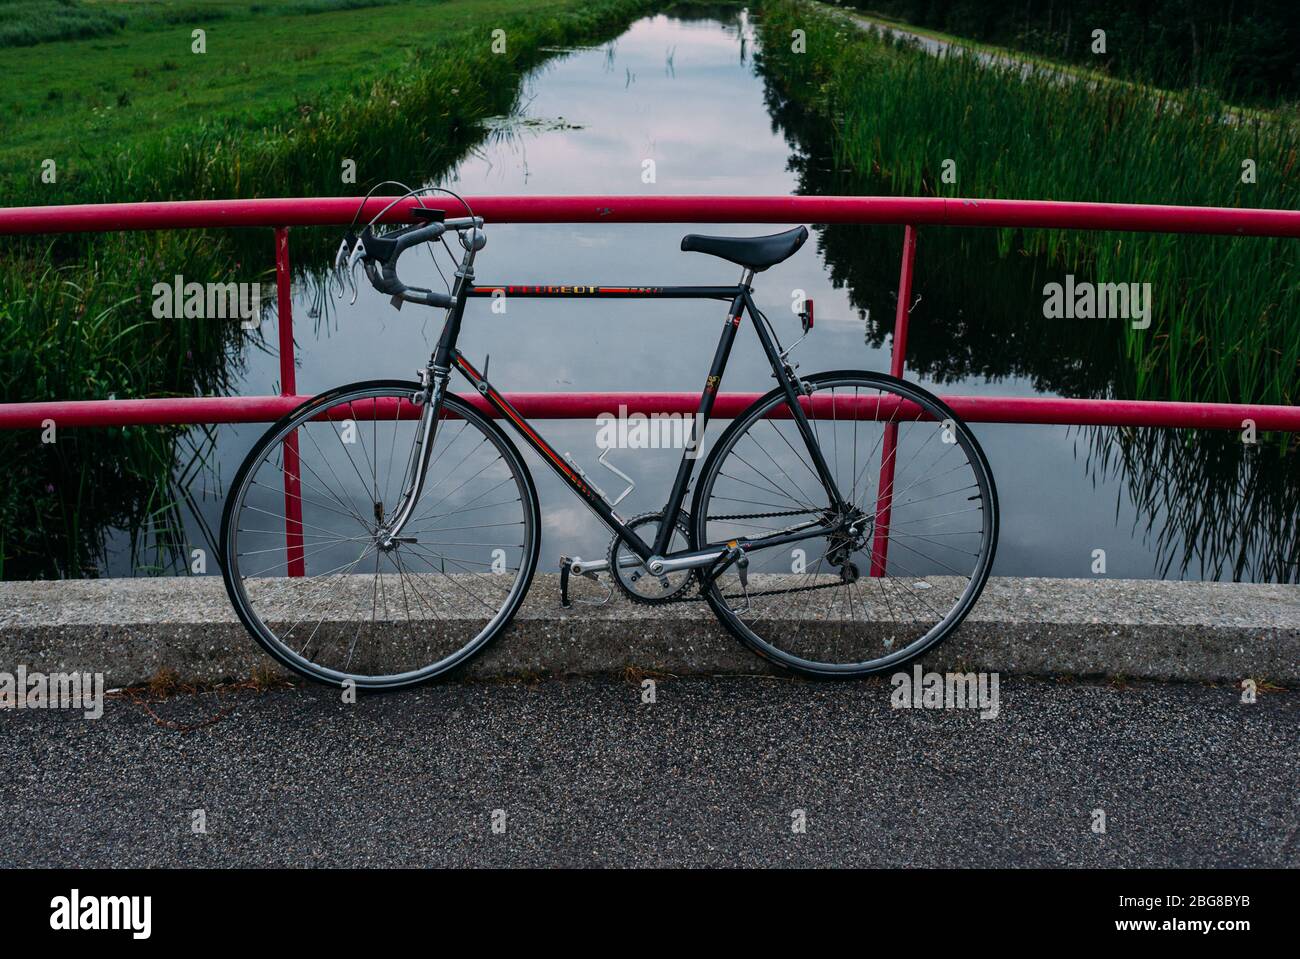 vintage peugeot racing bike leaning on a pink bridge. green lined canal, in background Stock Photo